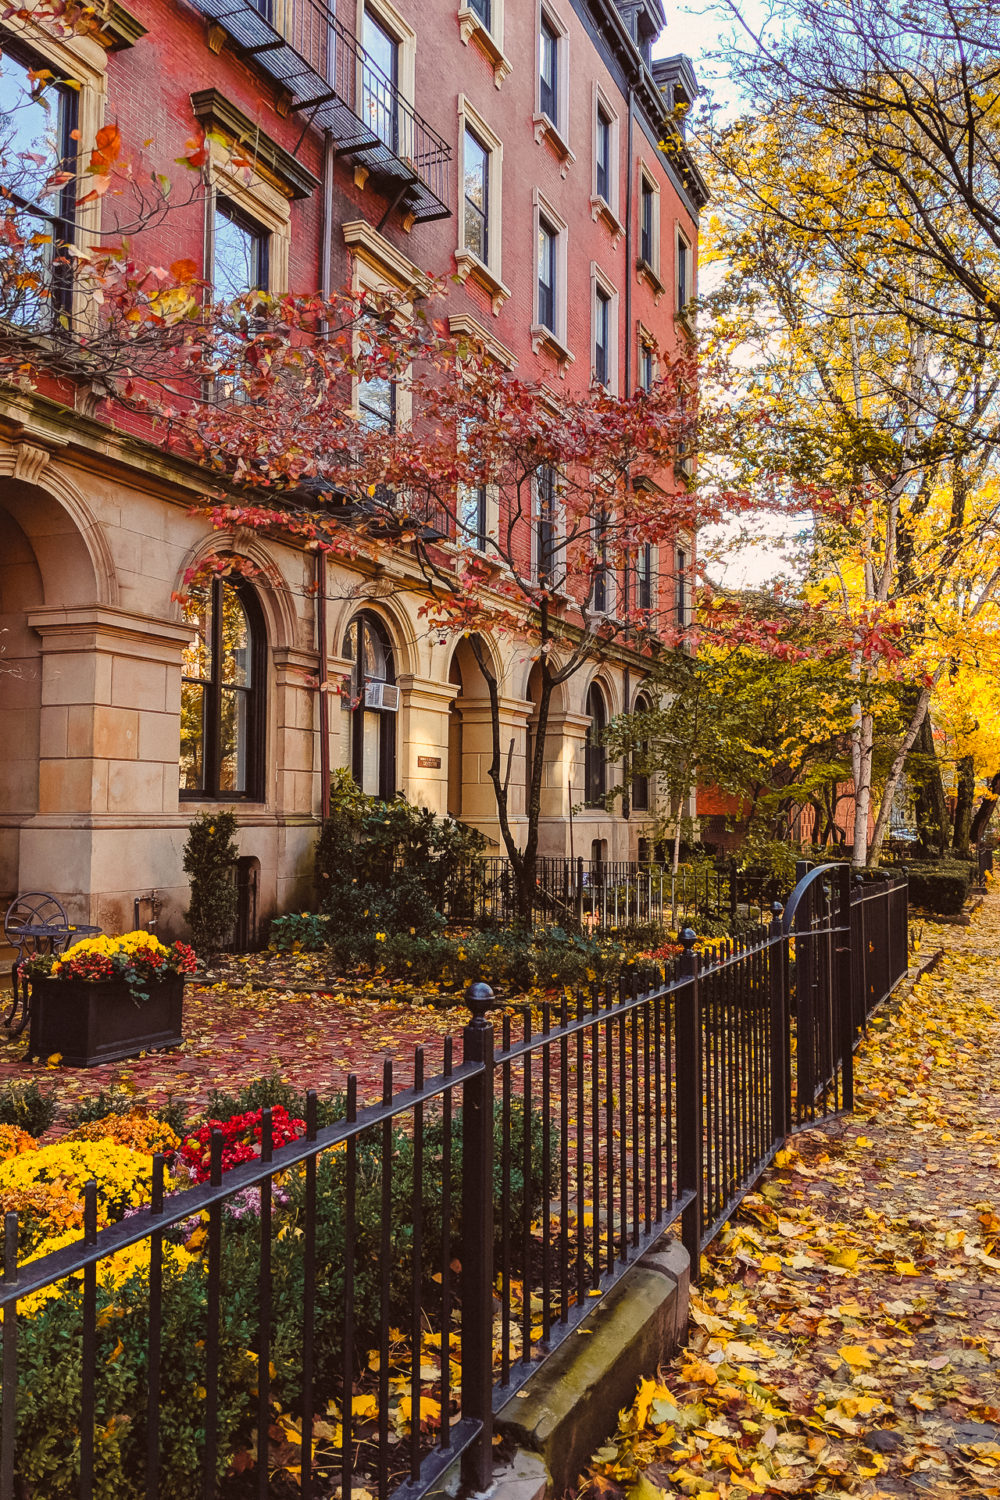 A New England Guide: 15 Photos Proving That Boston is a top Autumn Destination